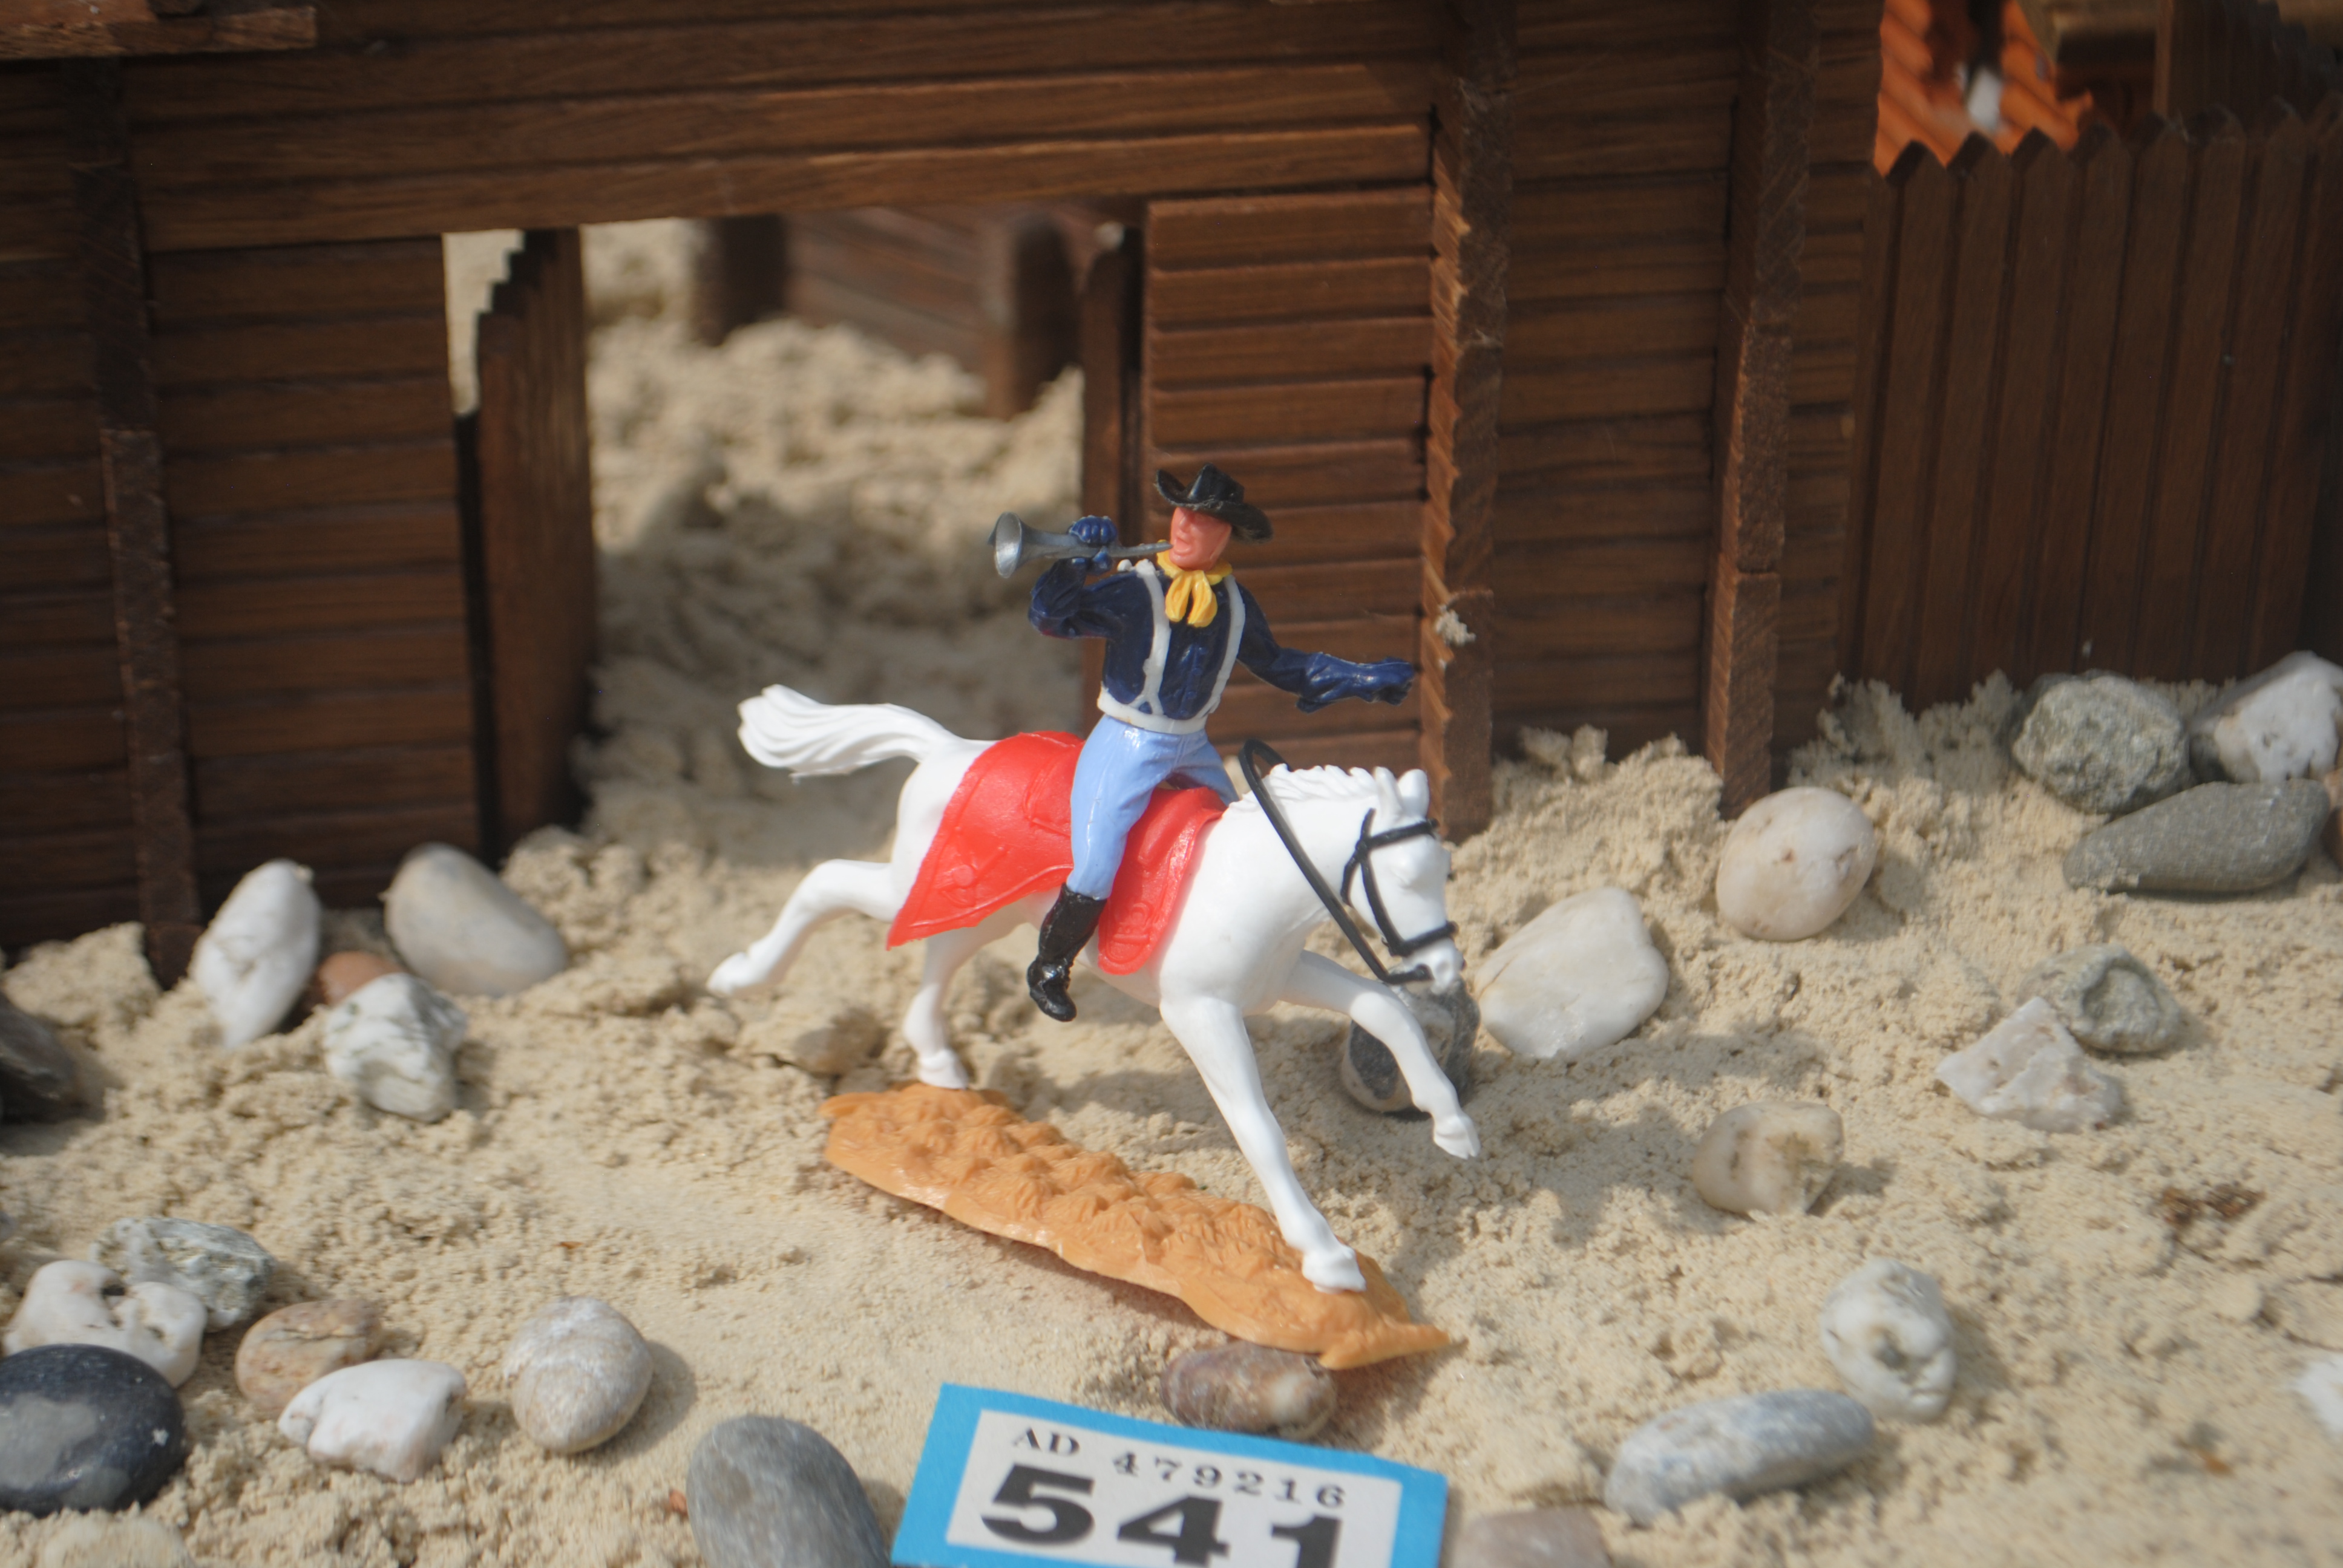 Timpo Toys B.541 Union Army Soldier riding American Civil War / US 7th Cavalry 2nd version 